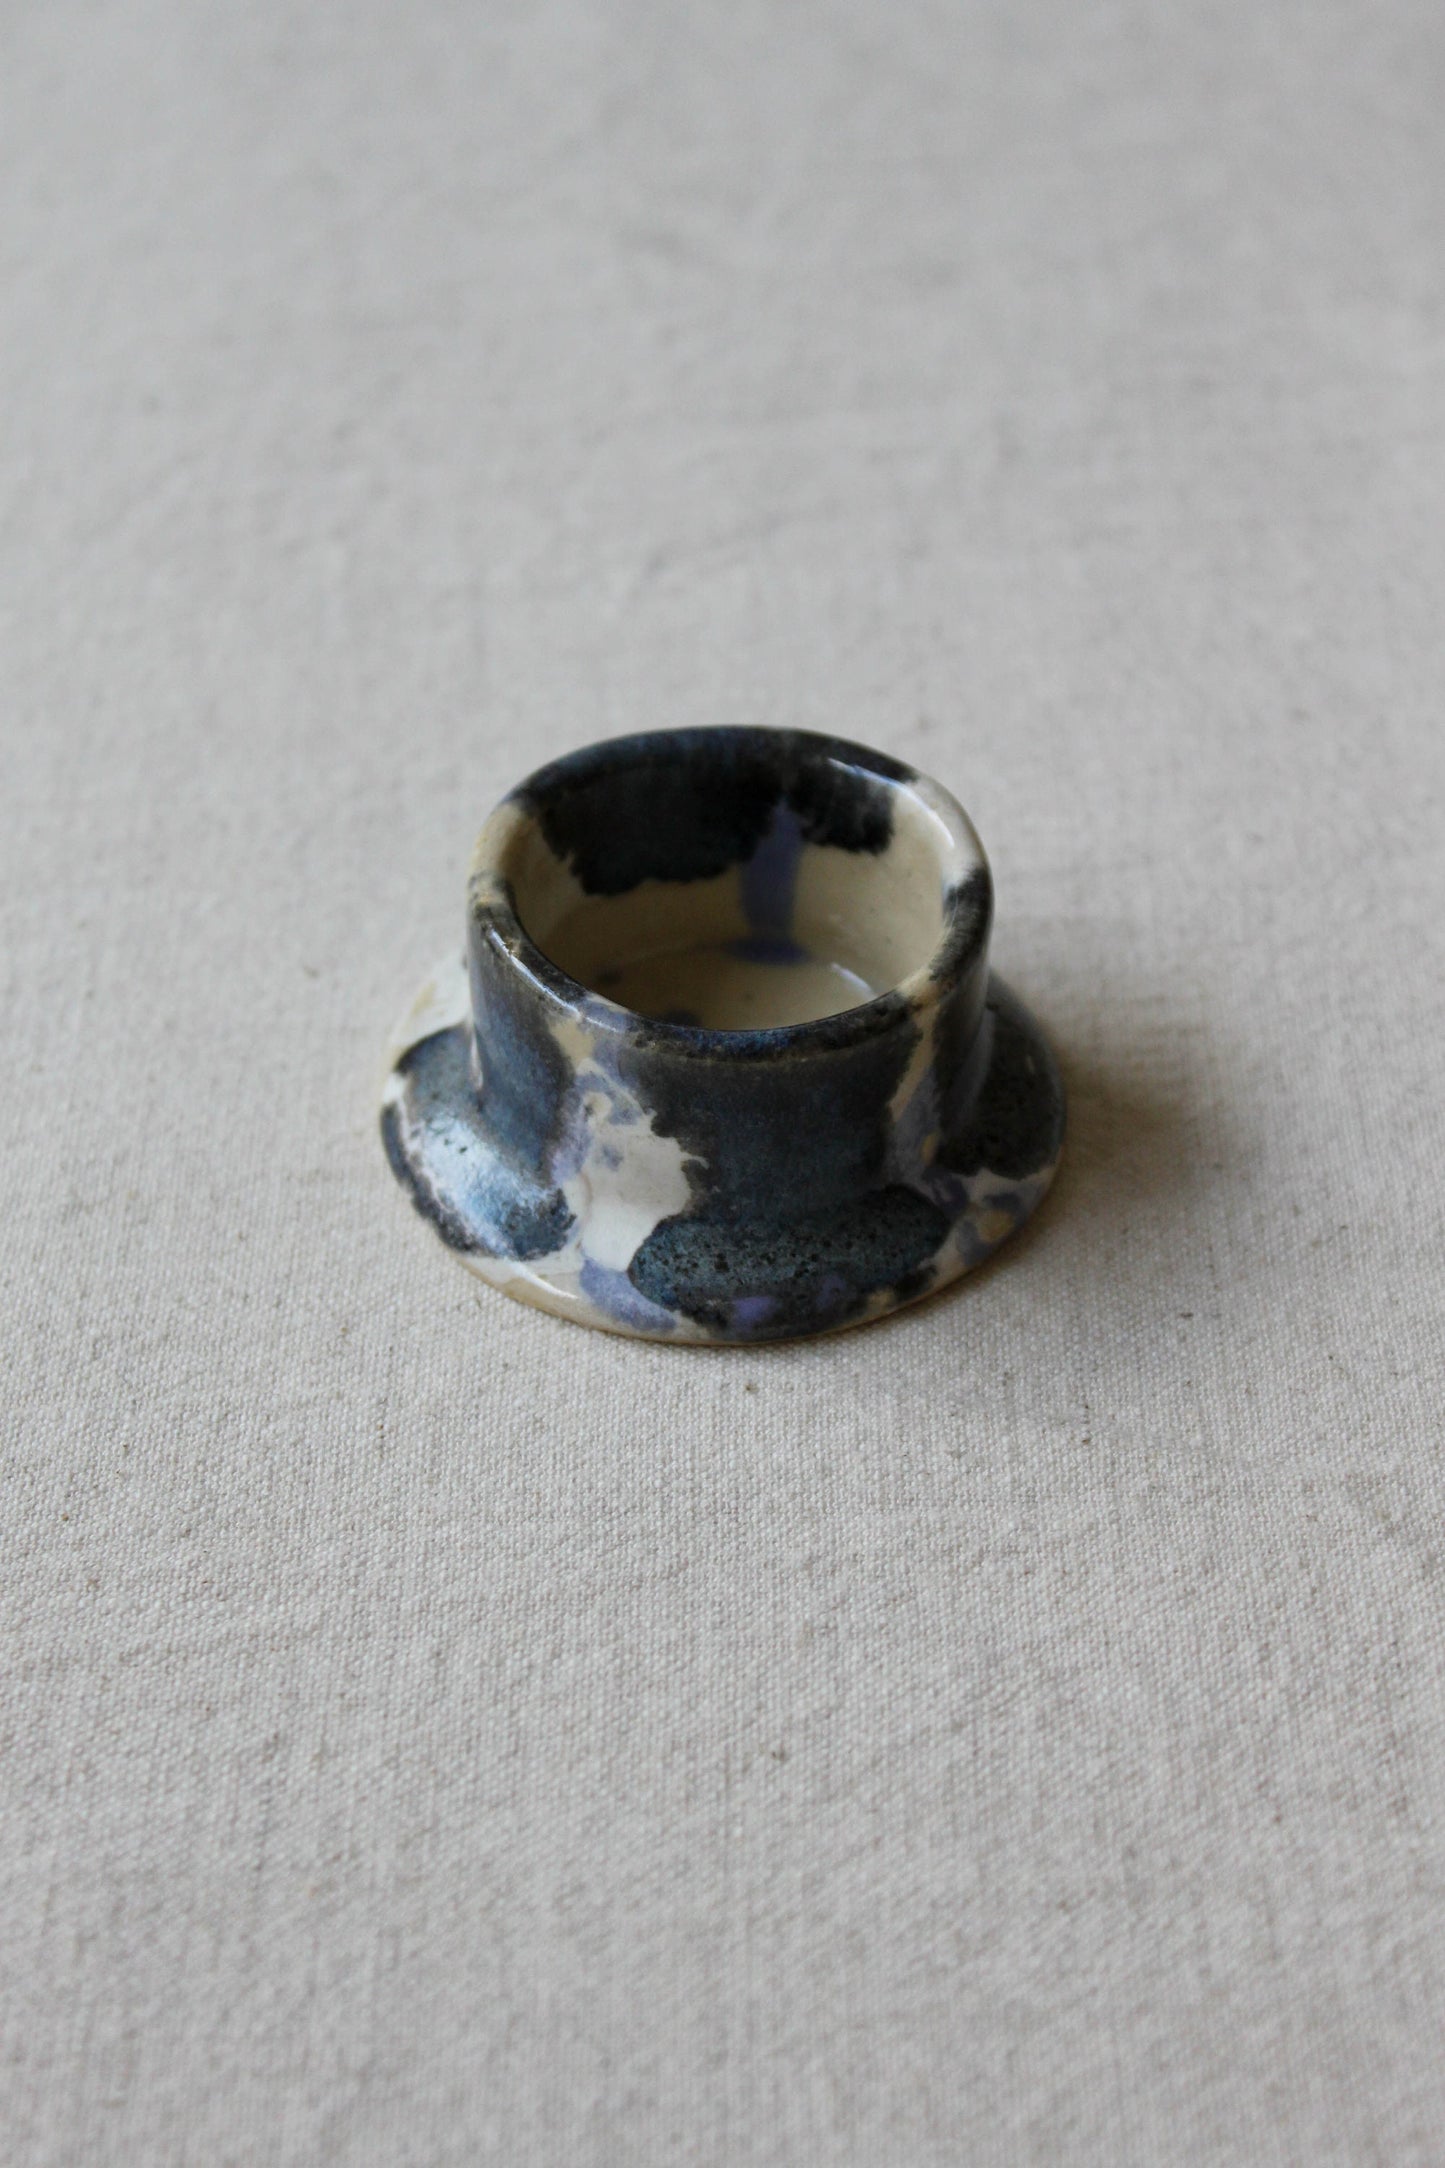 Special Edition Ceramic Tealight Candle Holder in Mottled Blue